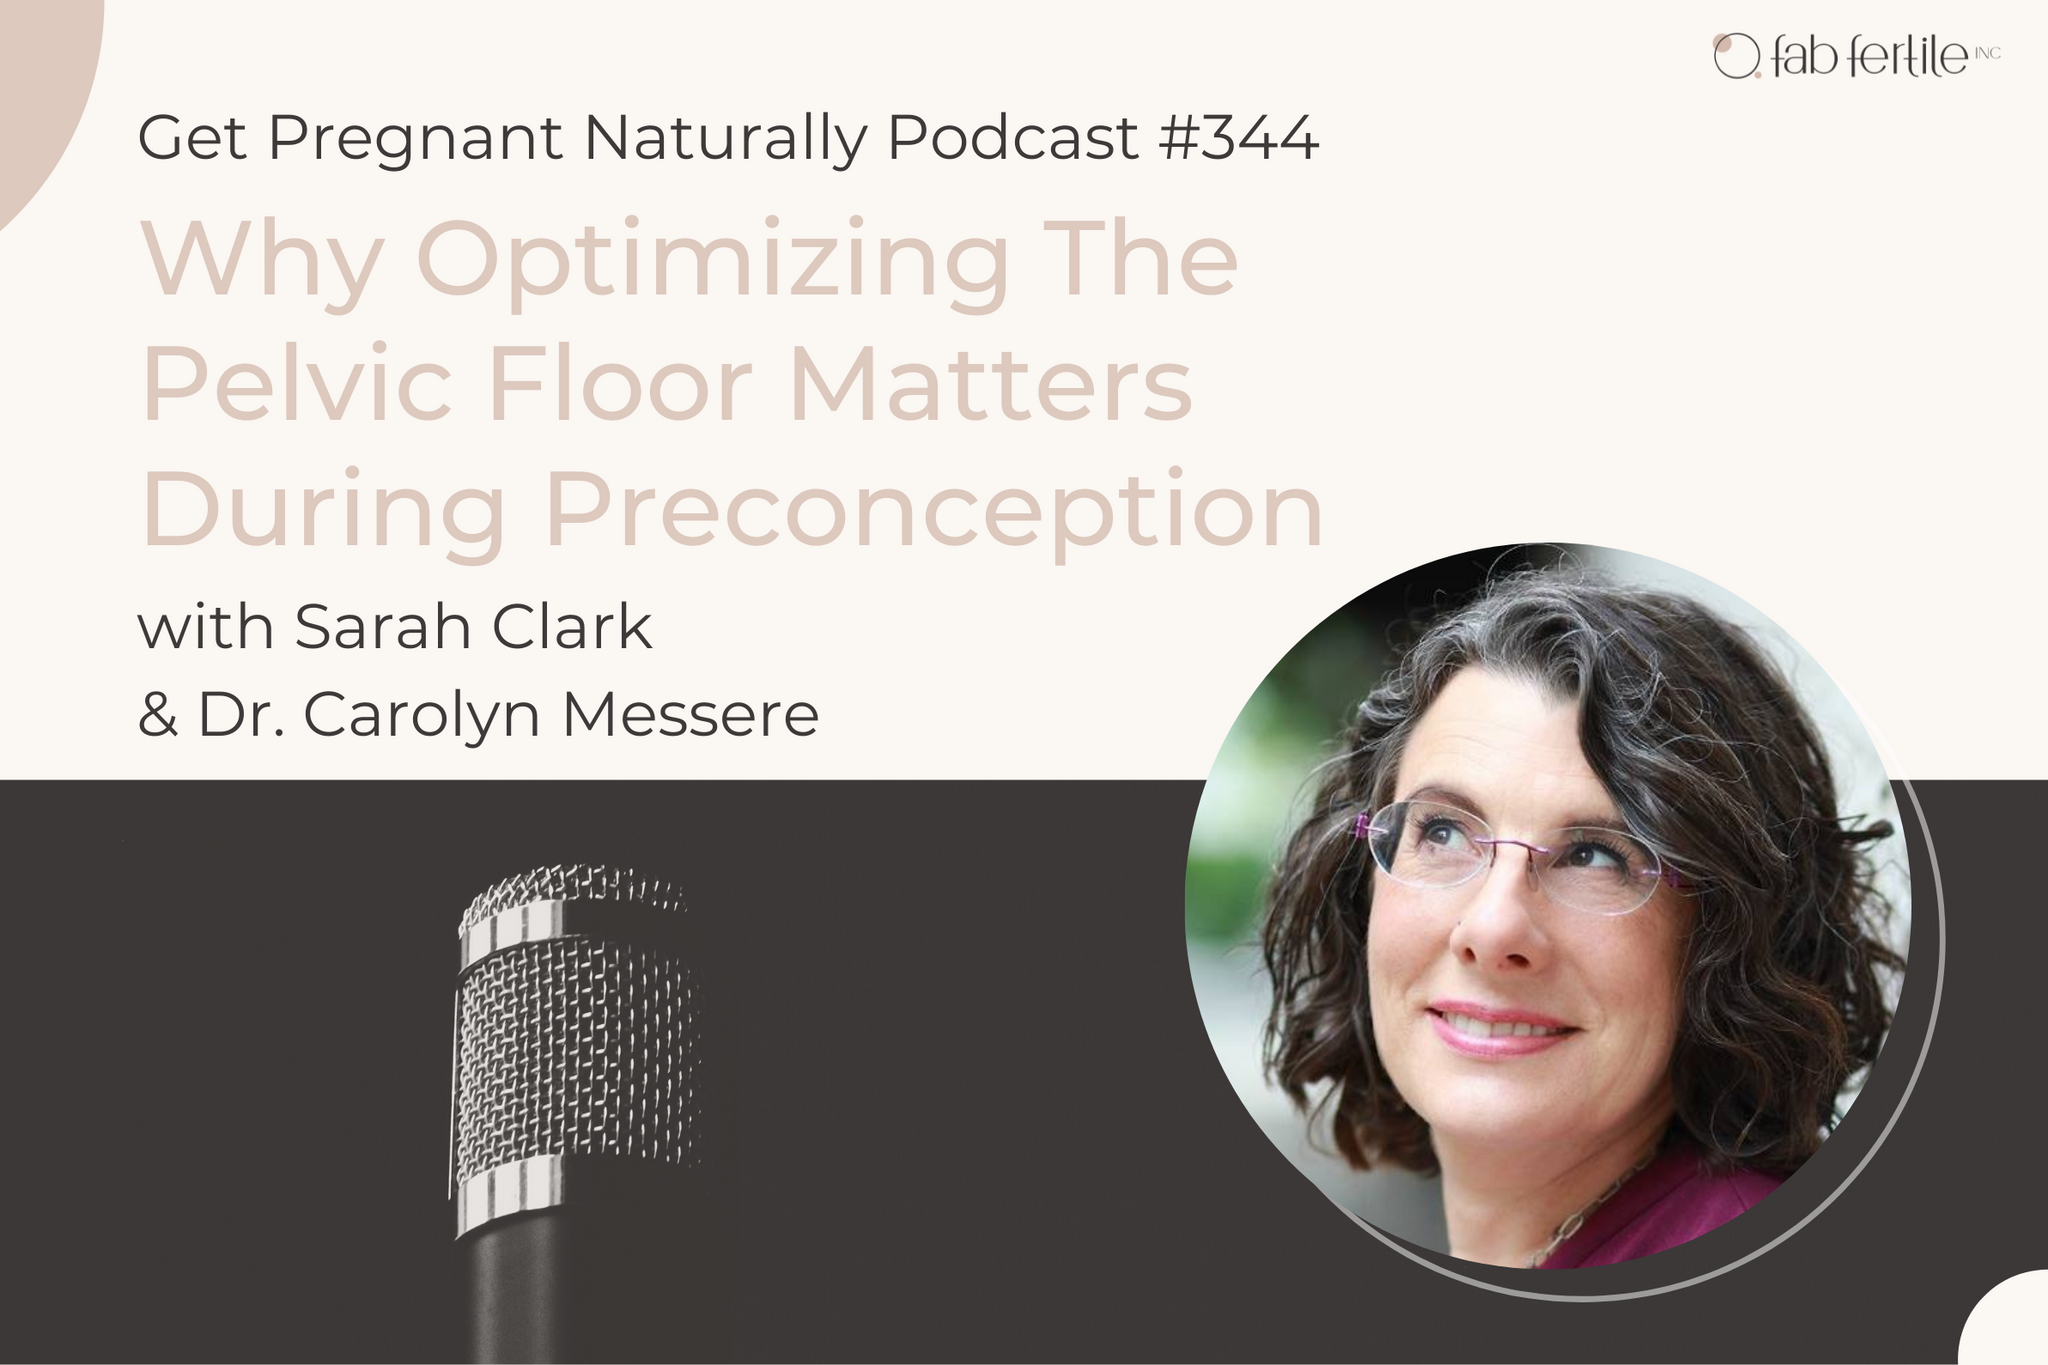 Why Optimizing The Pelvic Floor Matters During Preconception